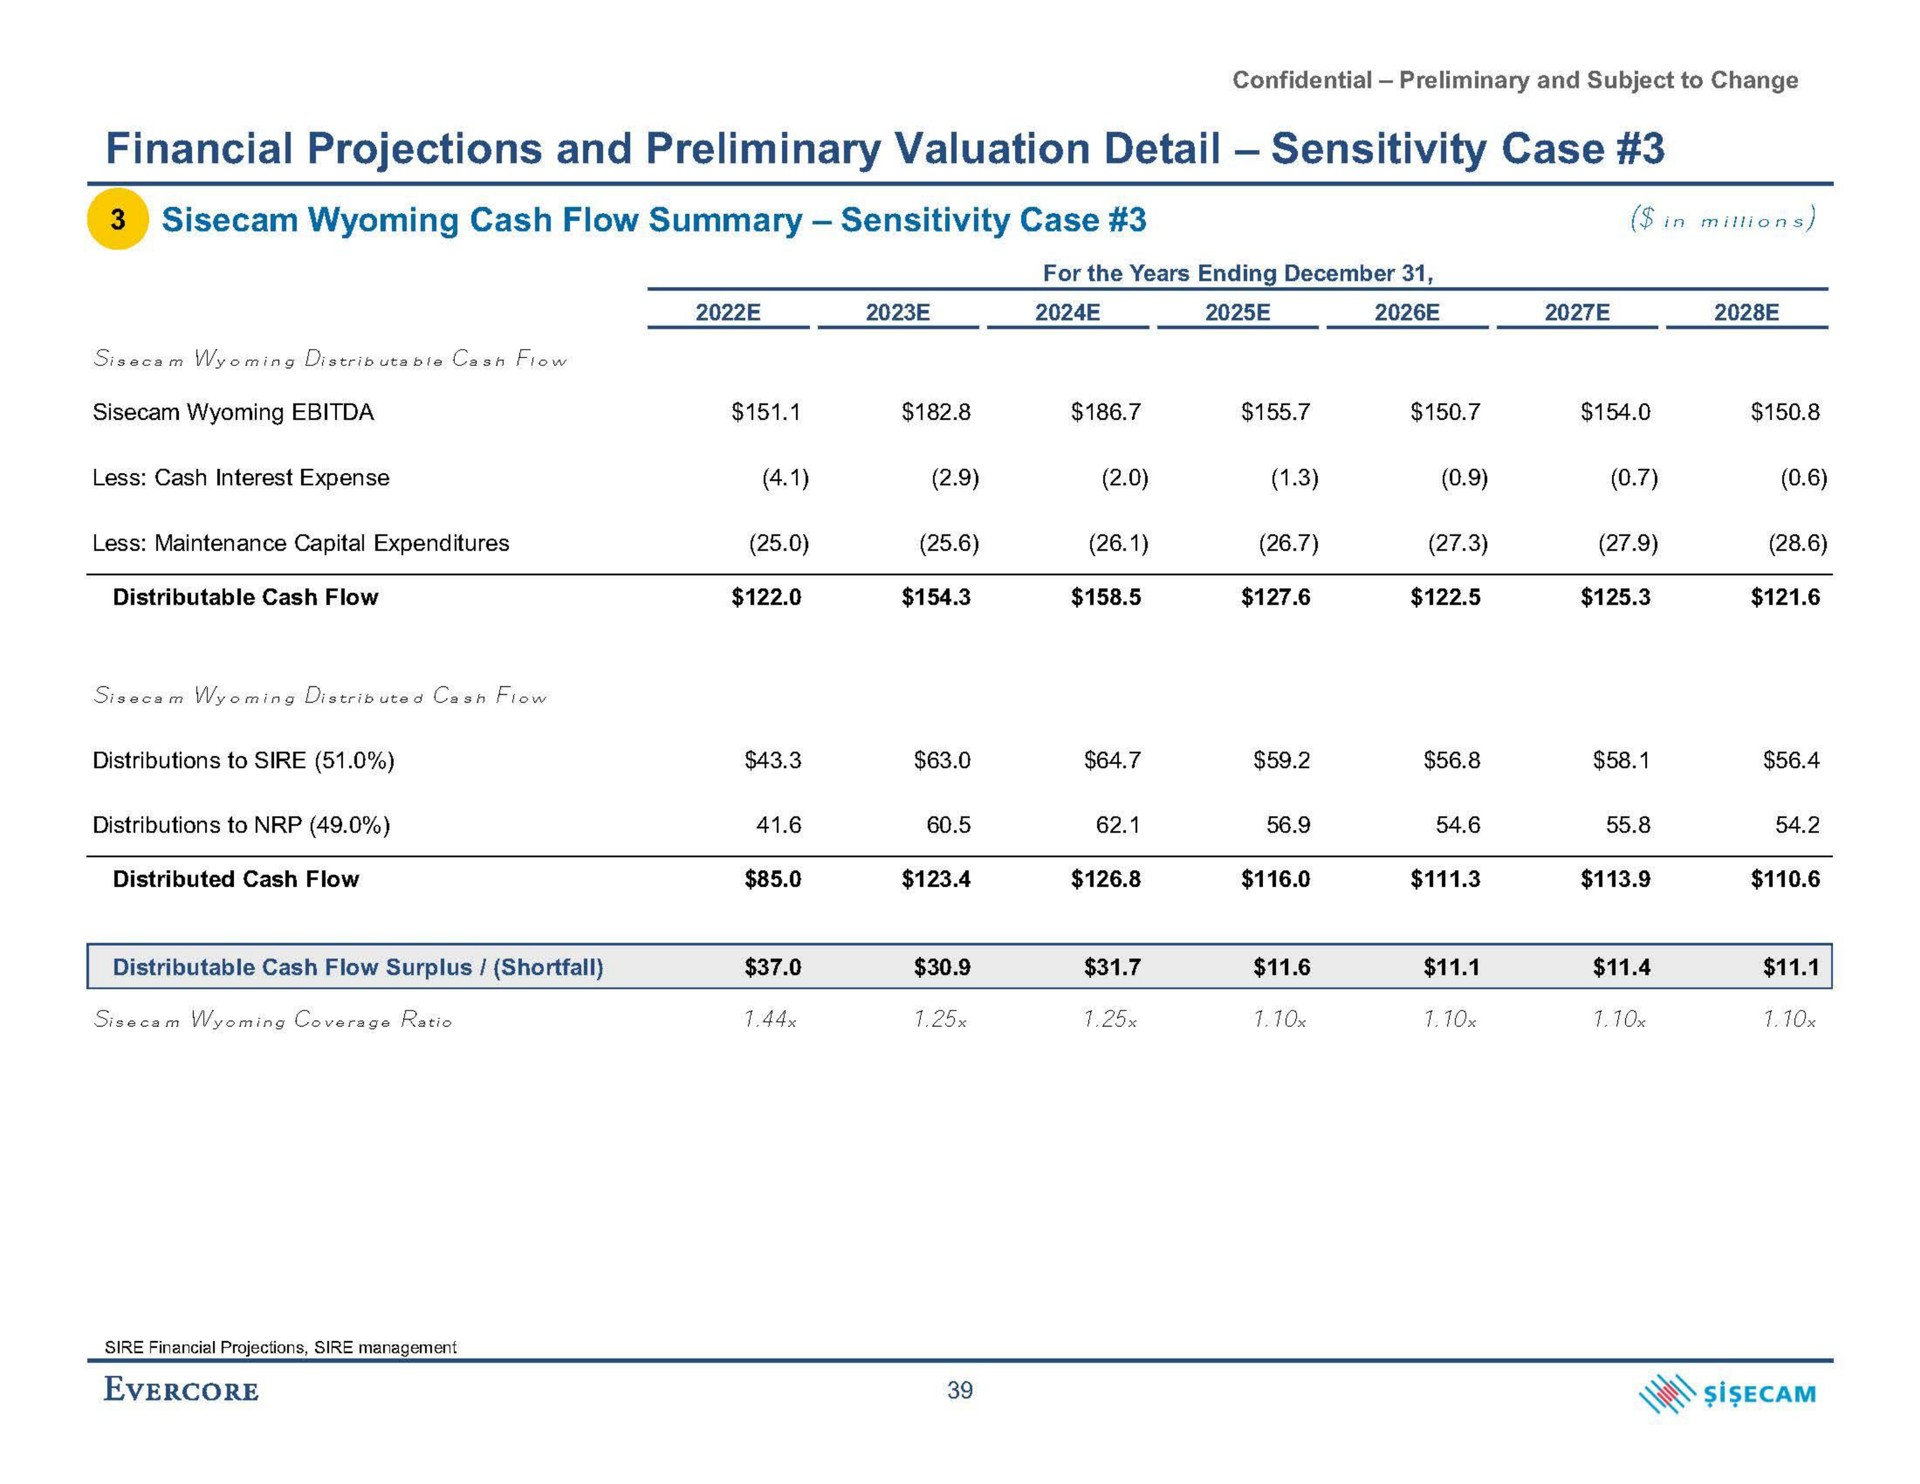 financial projections and preliminary valuation detail sensitivity case cash flow summary sensitivity case in | Evercore